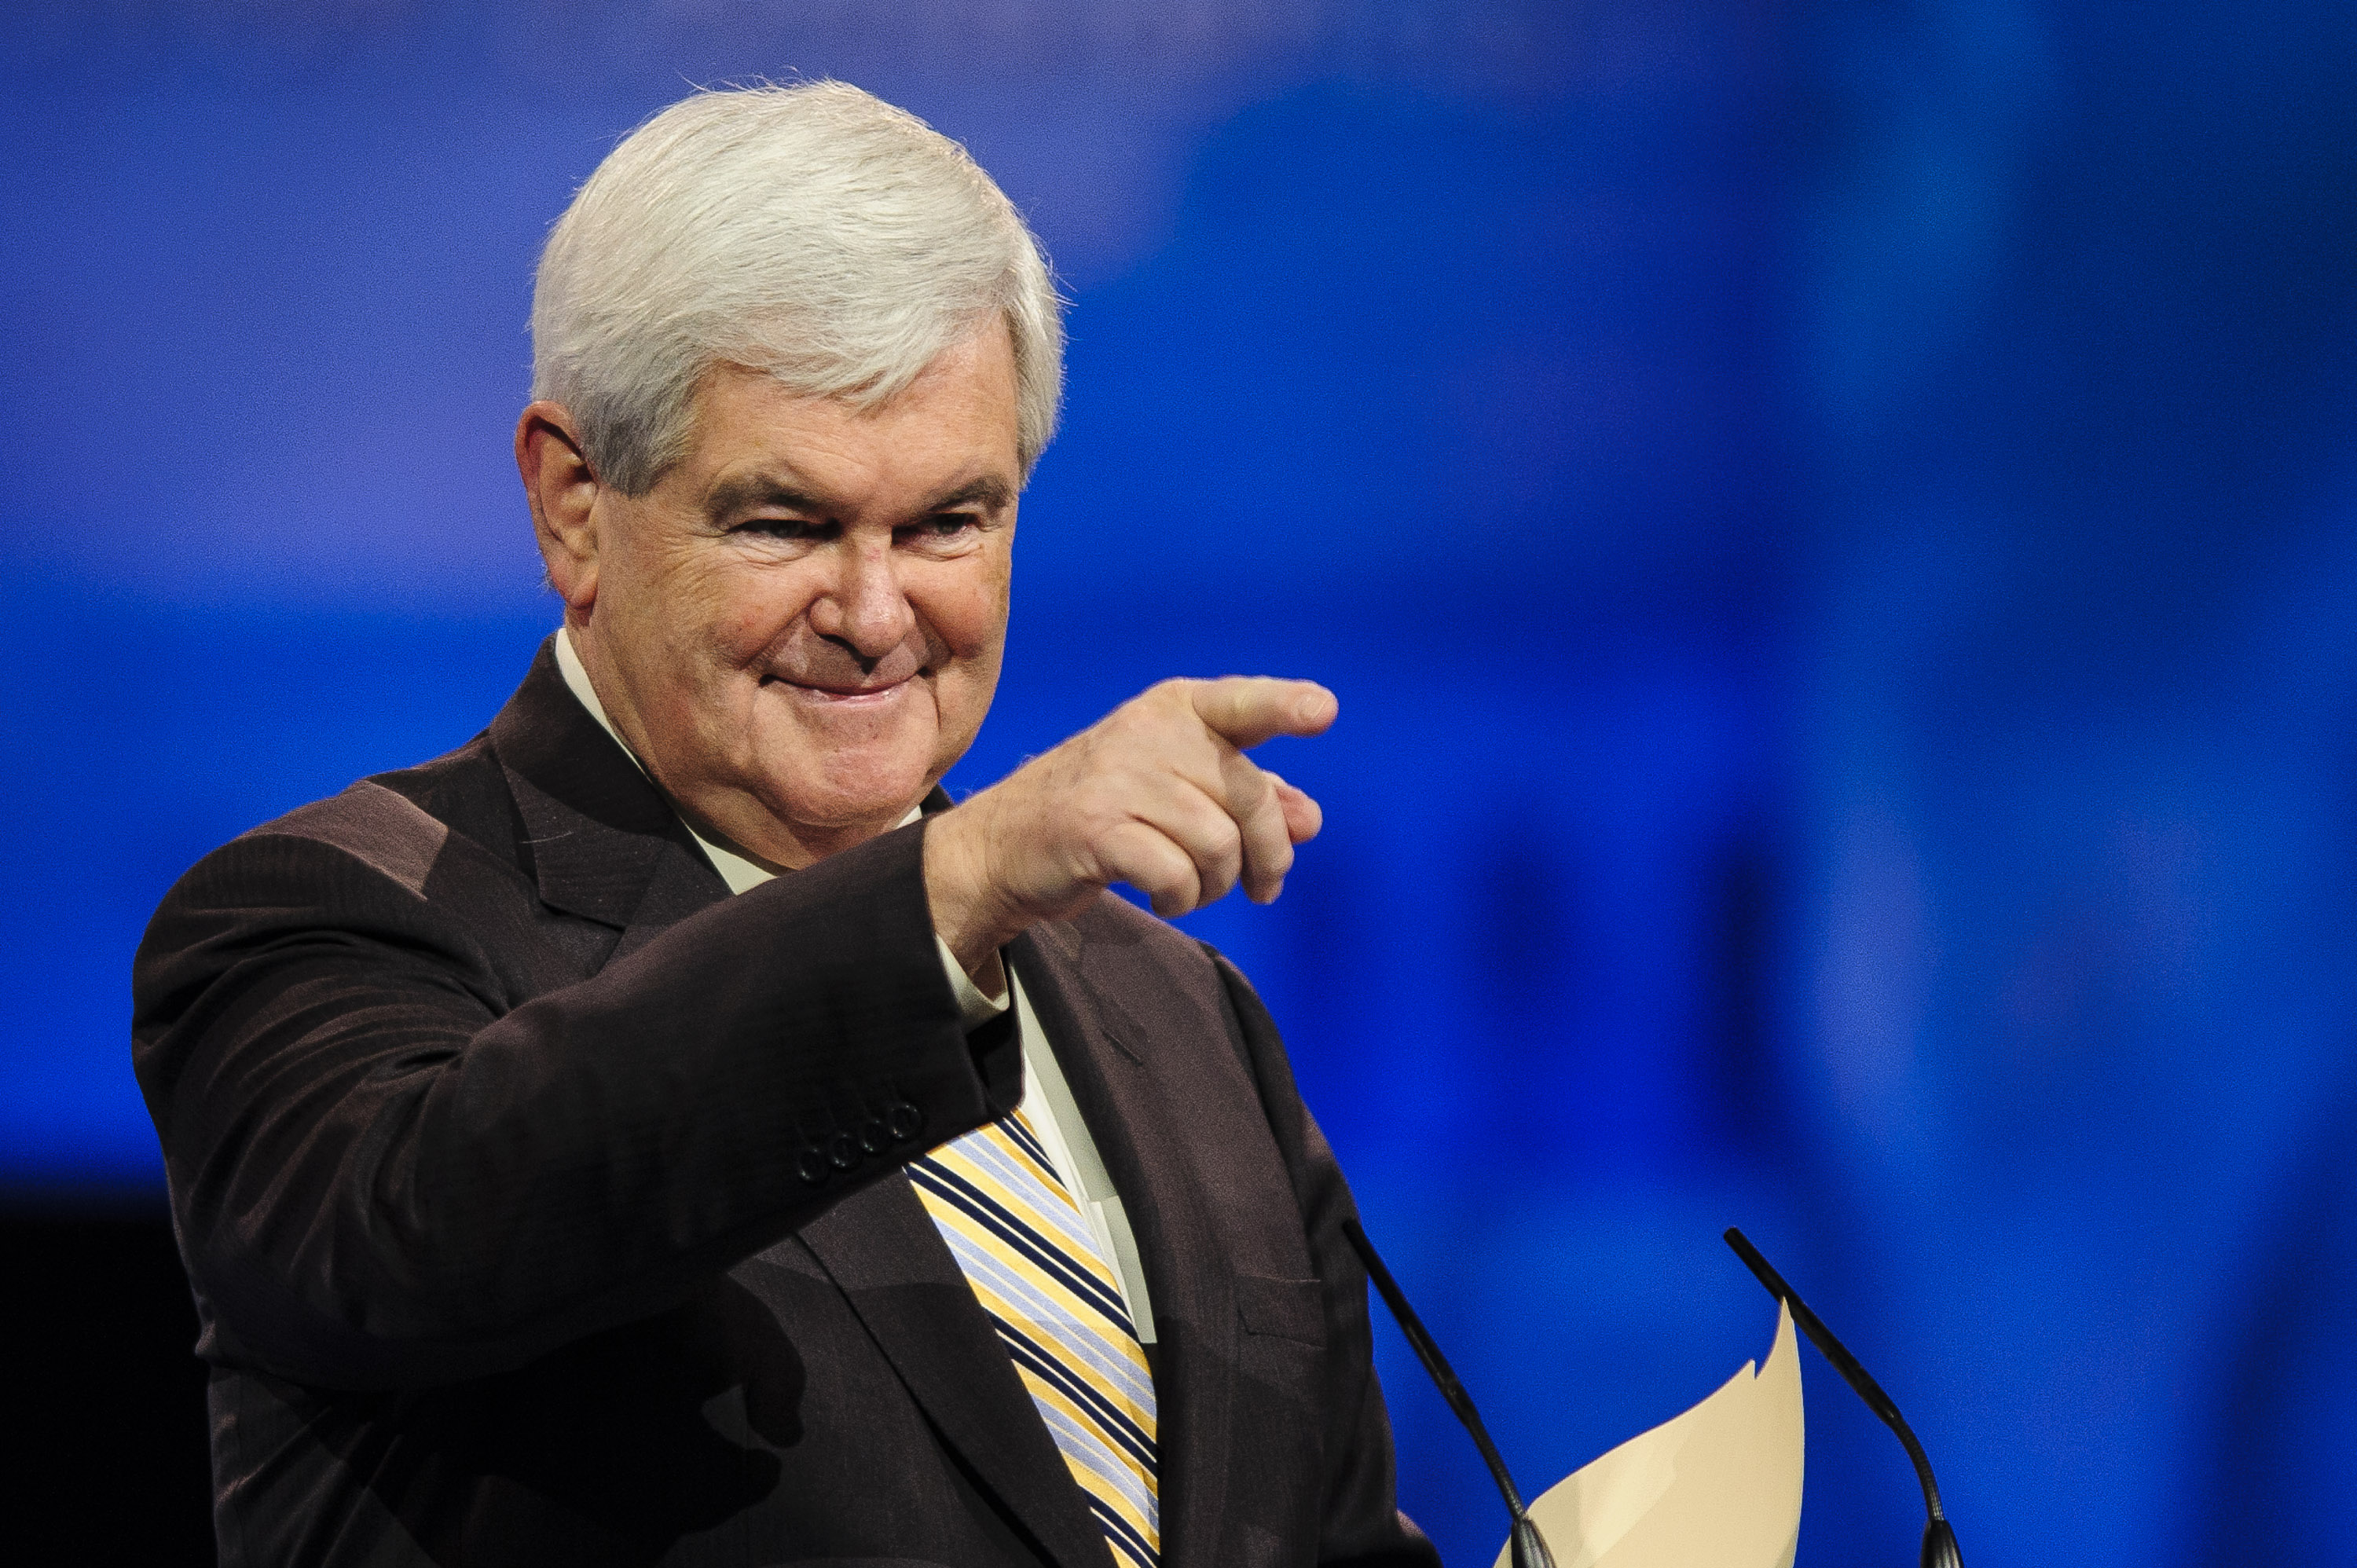 Newt Gingrich on stage